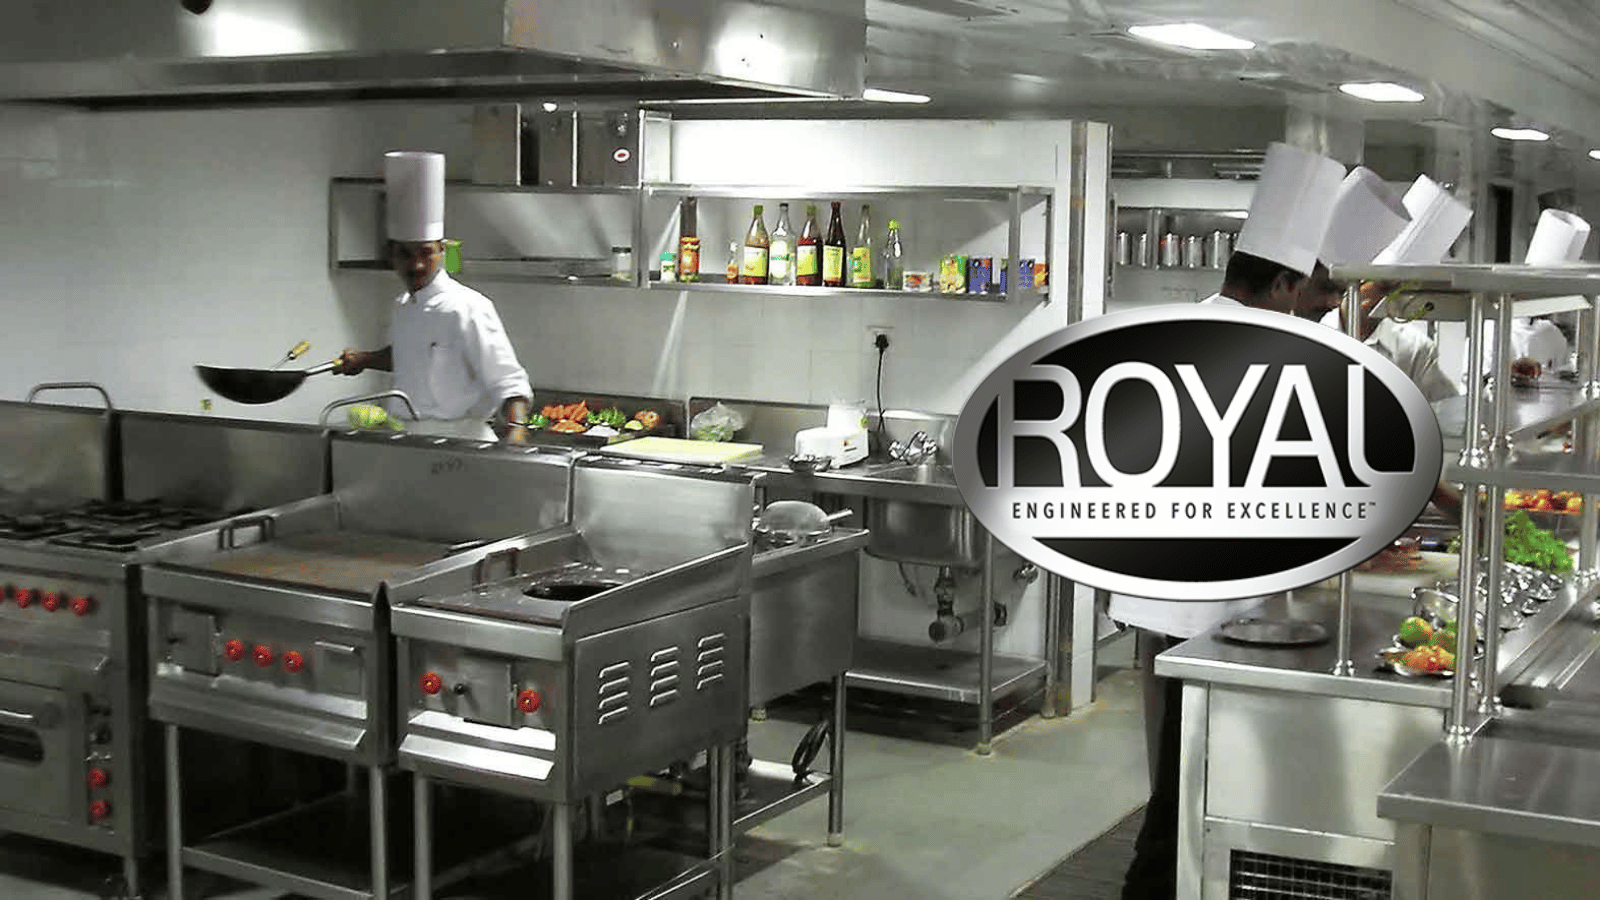 Commercial kitchen with chefs working. Royal logo on left side of image.